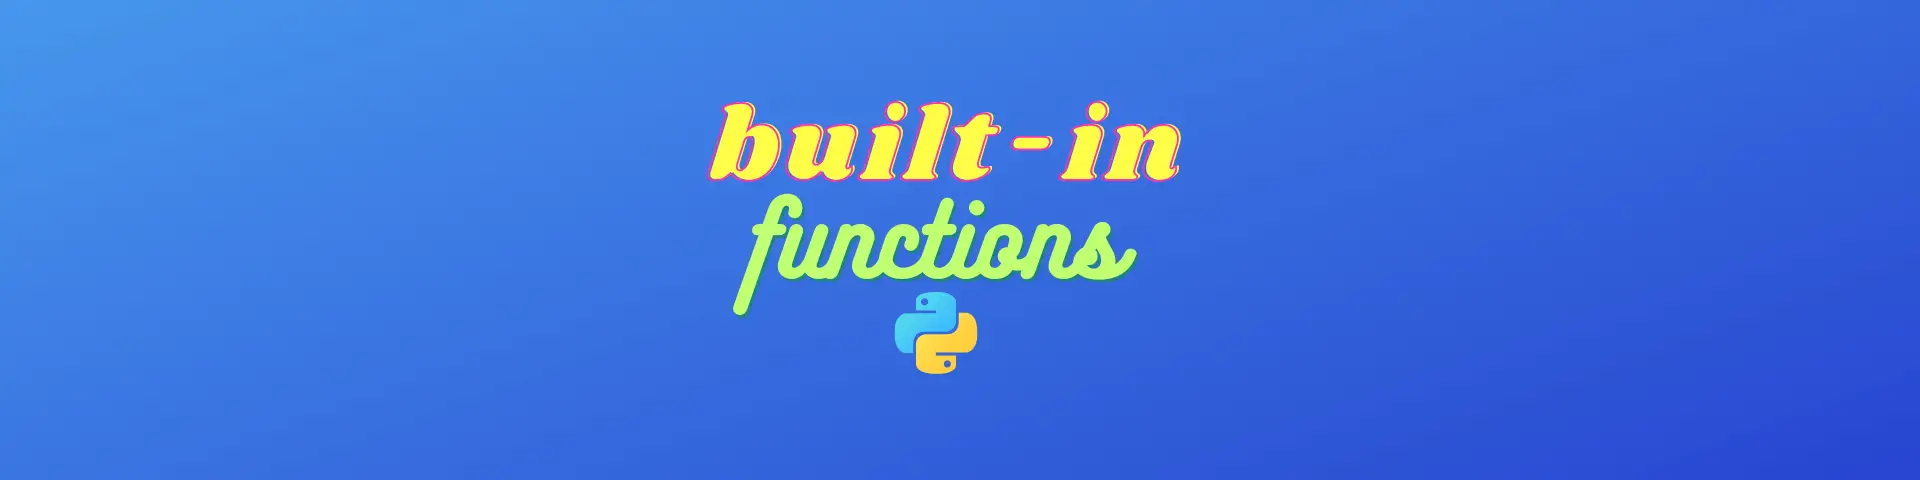 Working with Built-in Functions in Python